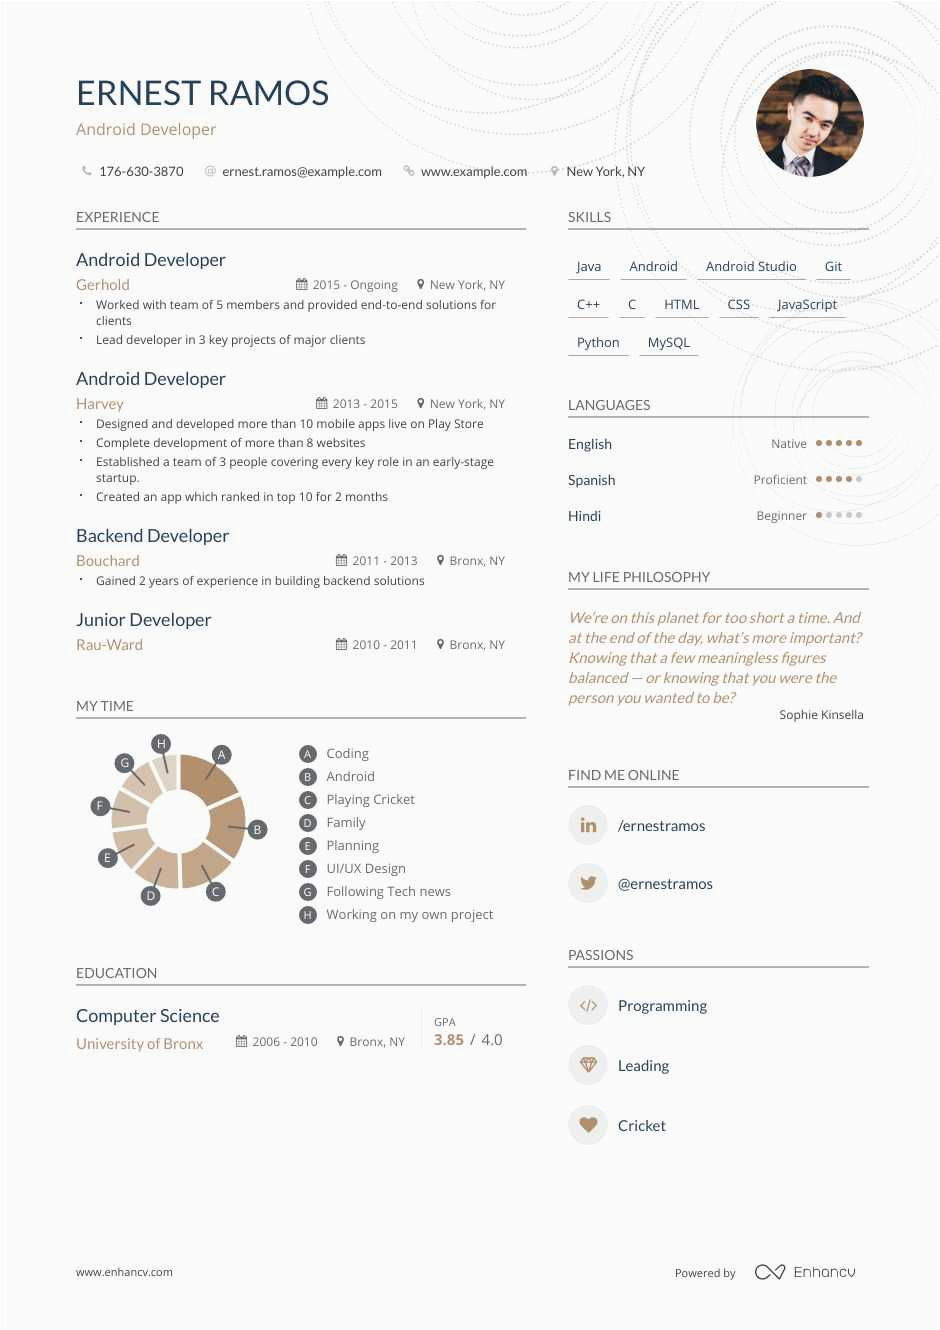 Sample Resume for 1 Year Experienced android Developer top android Developer Resume Examples & Samples for 2020